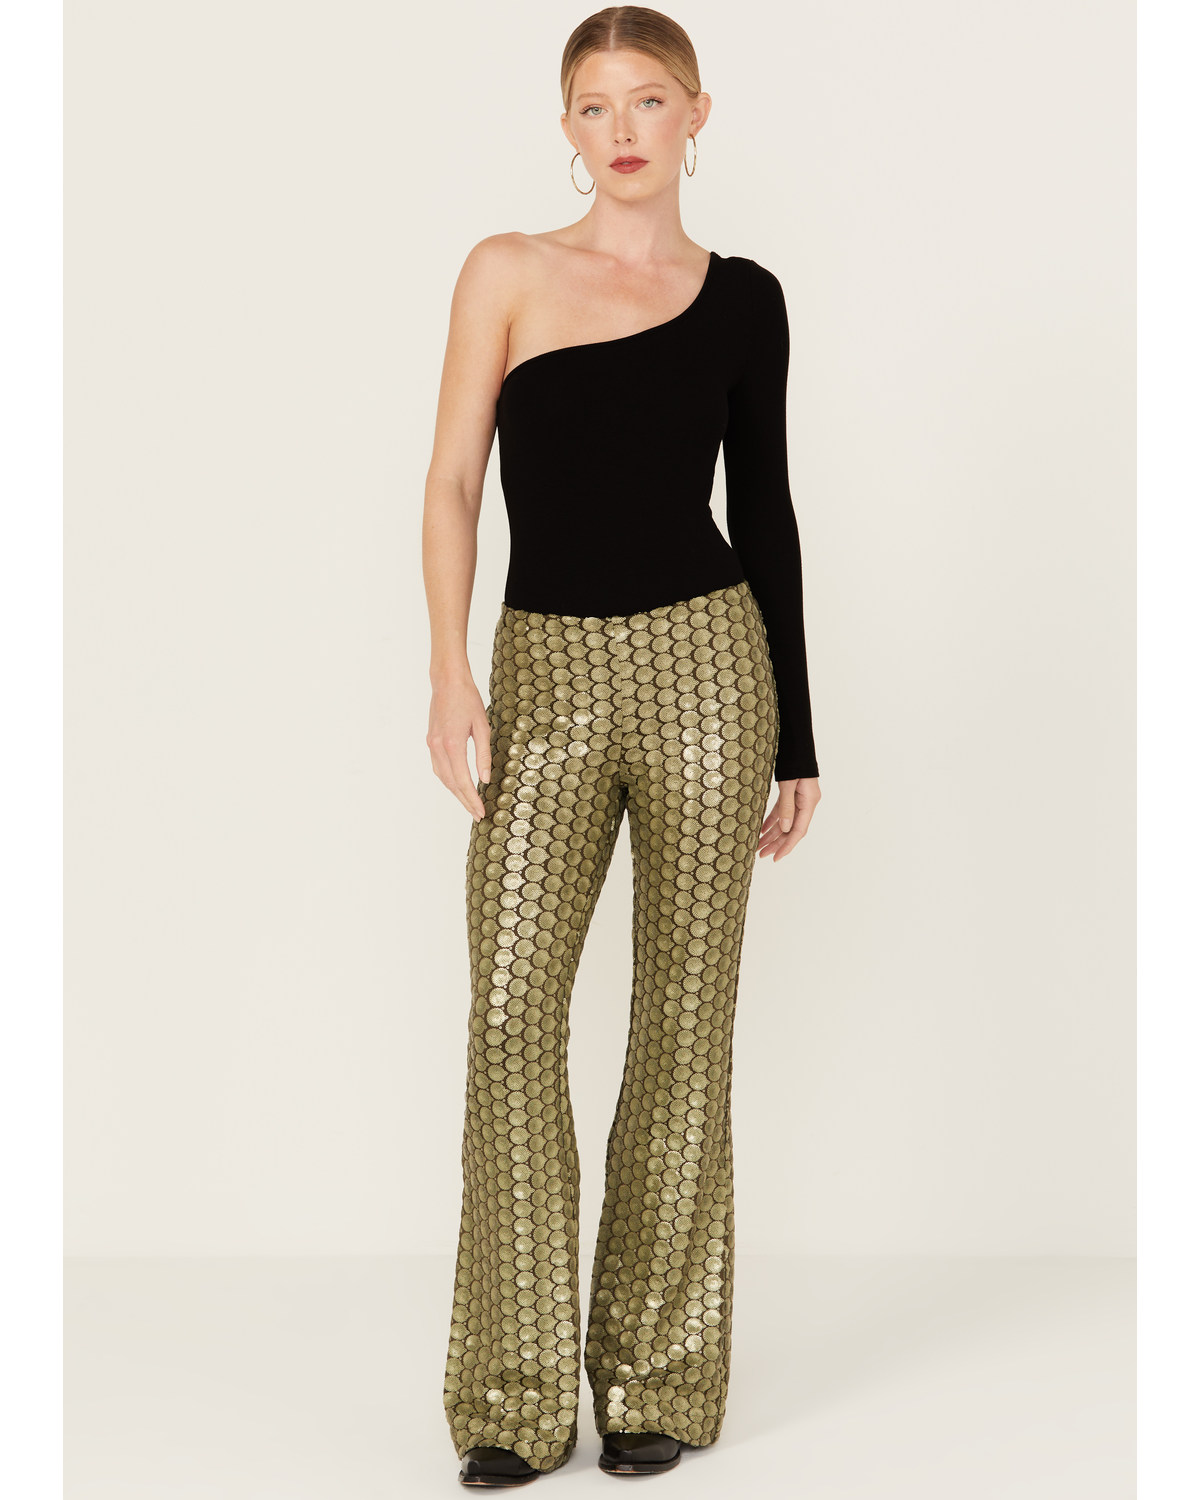 Free People Women's Wilder Days Sequins Flare Pants